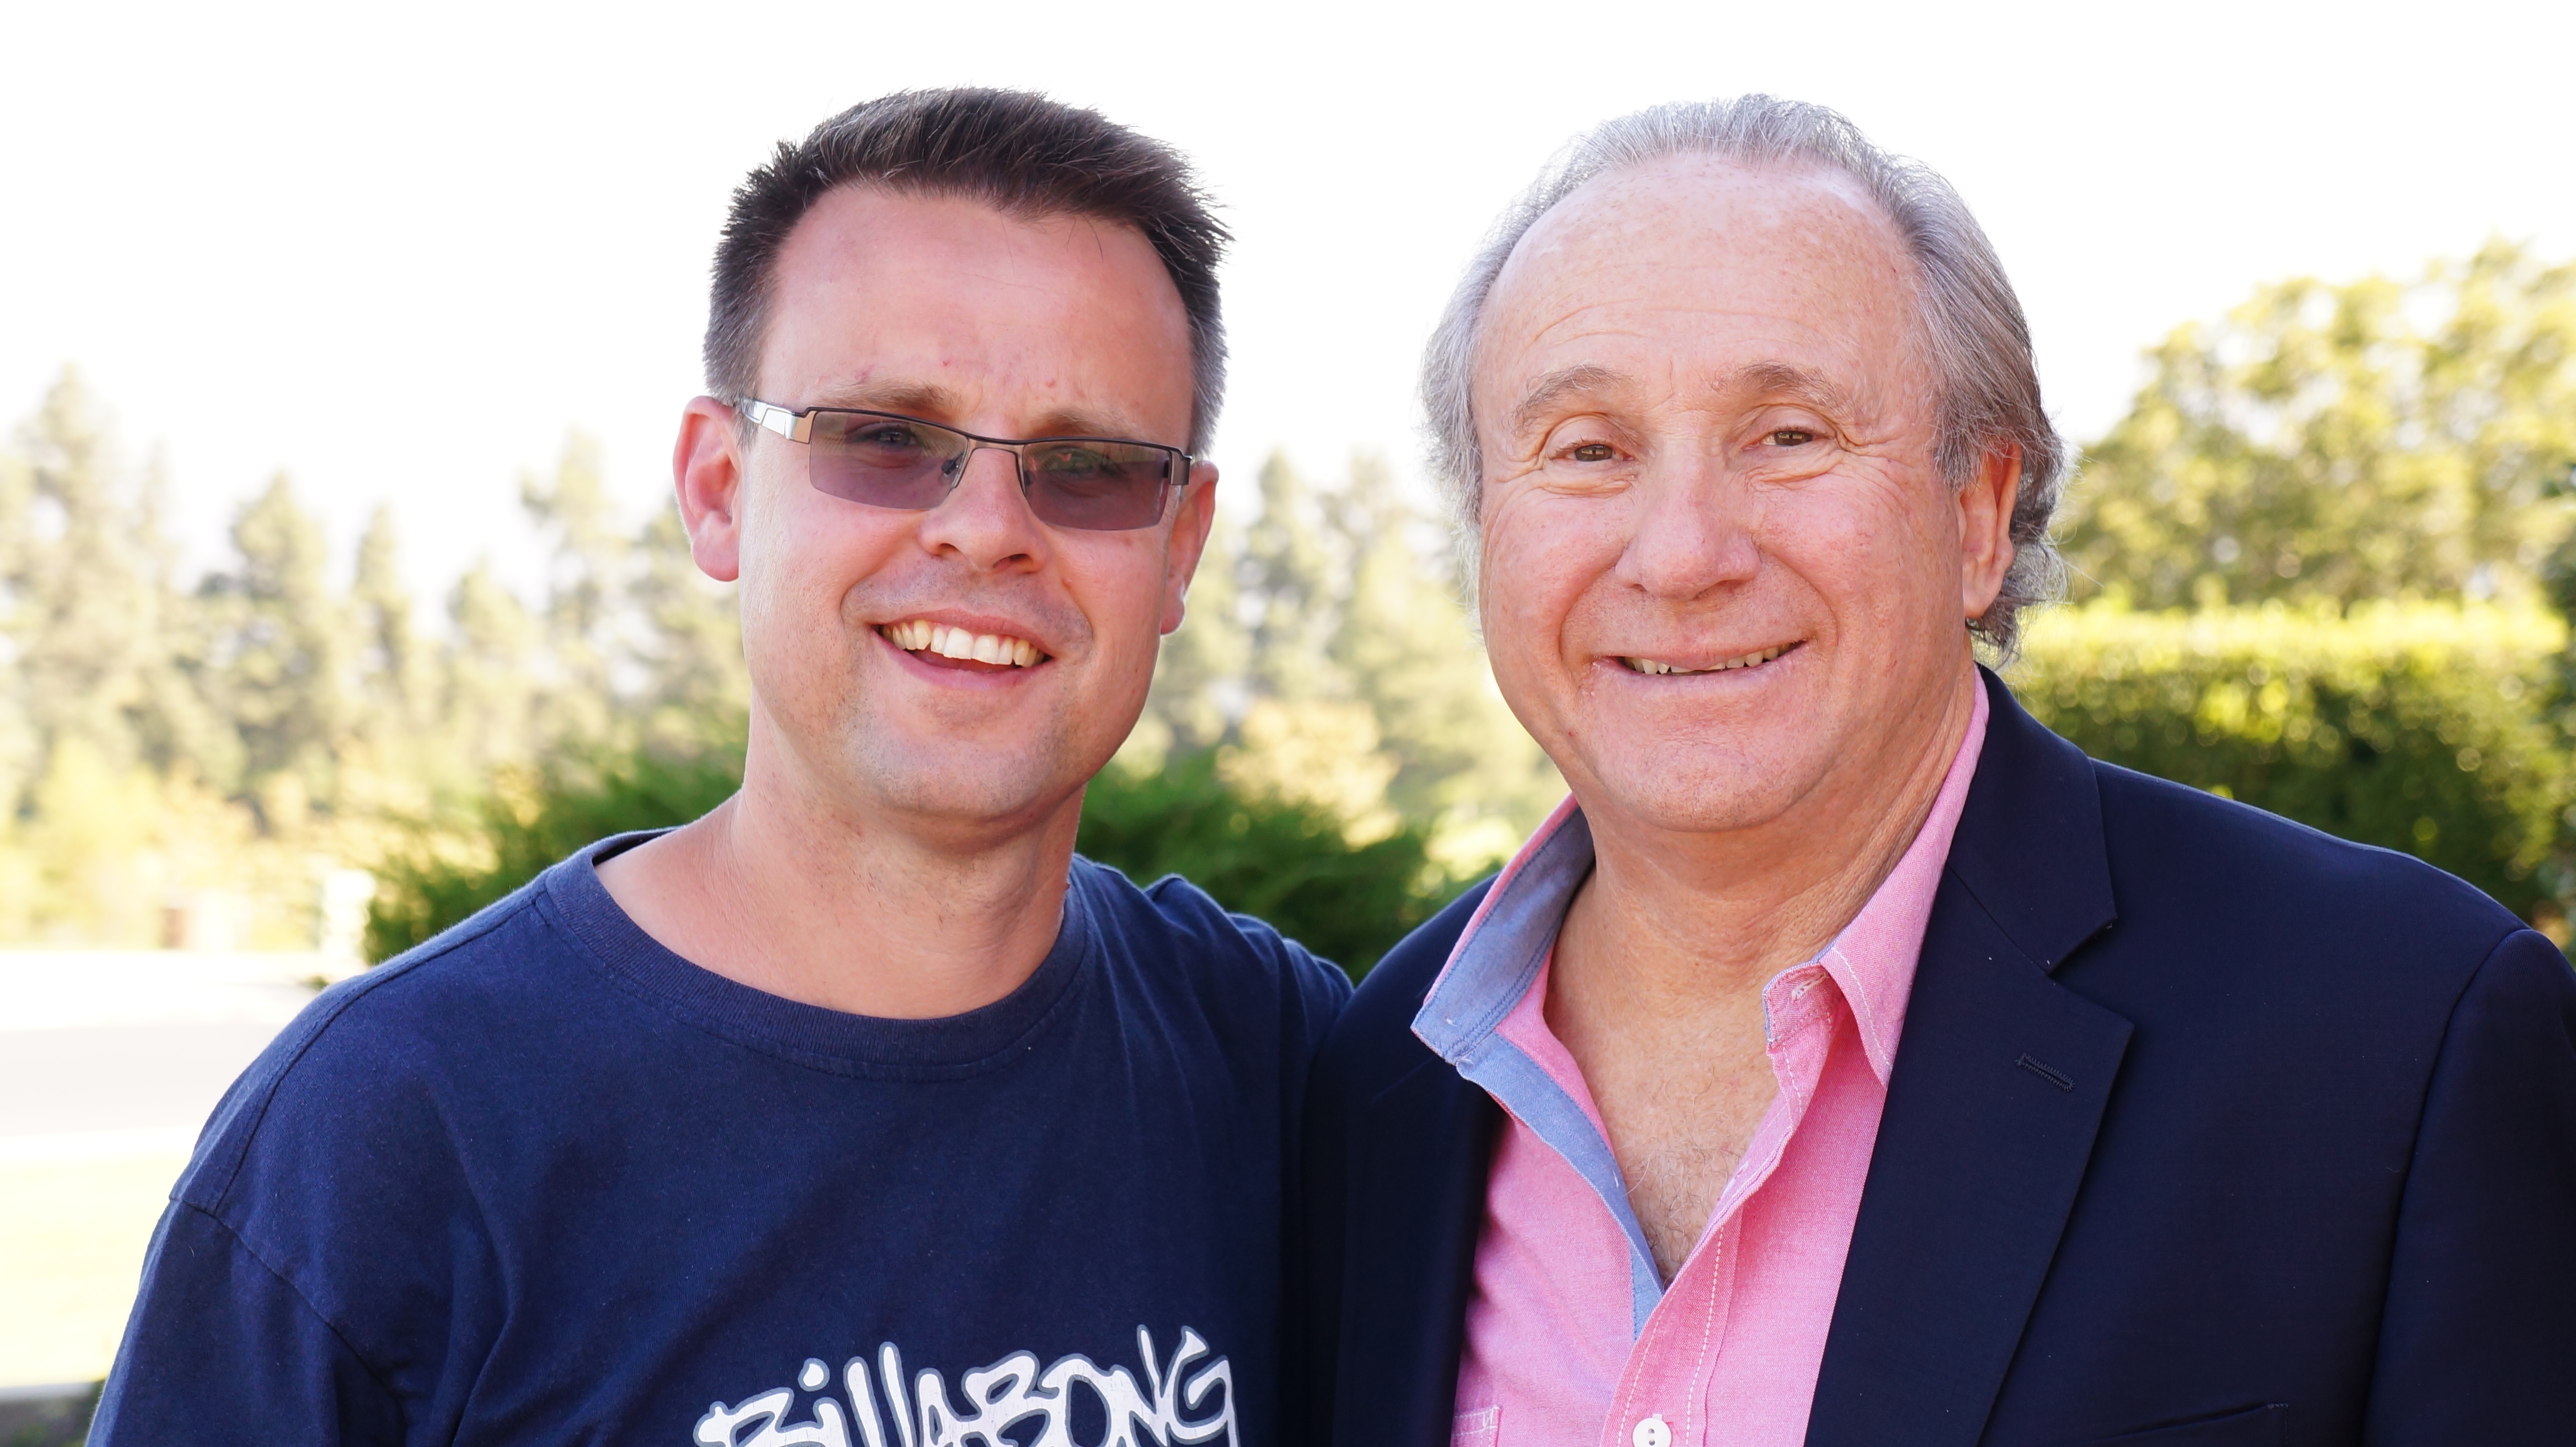 Lincoln Fenner with President Ronald Reagan's son and US Talkshow Host Michael Reagan.